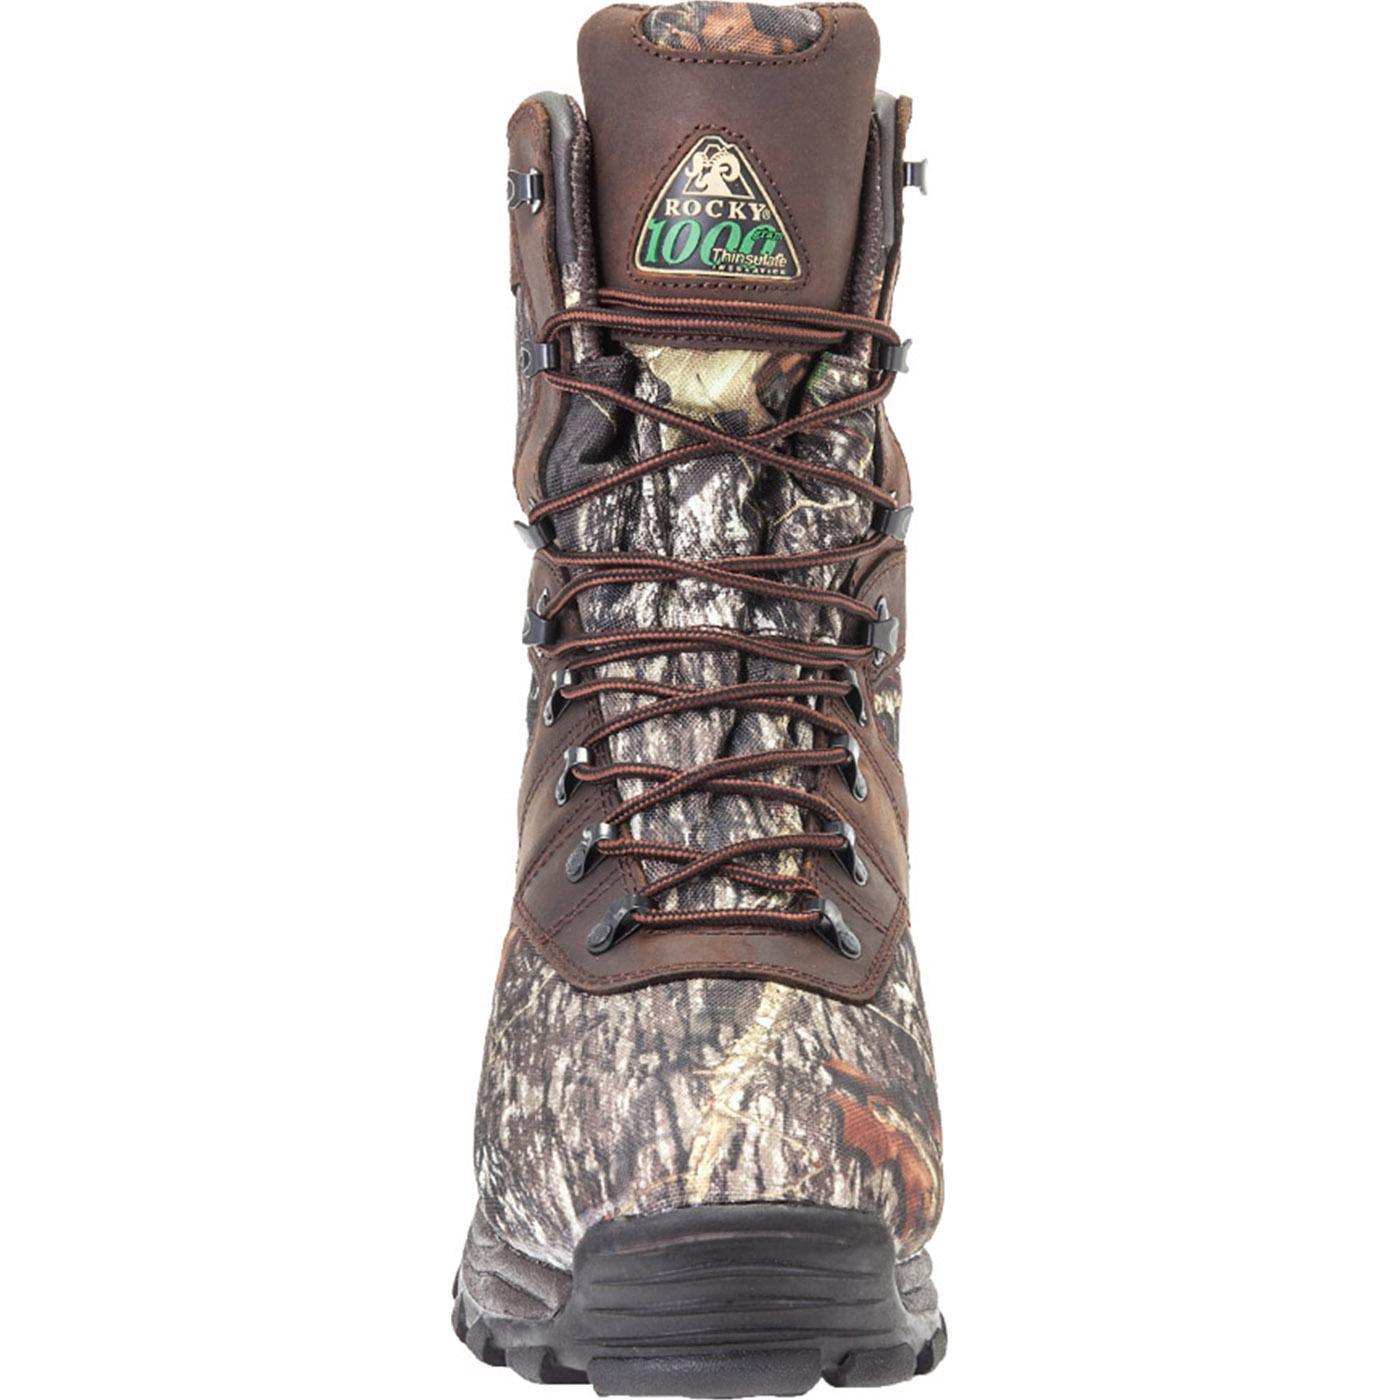 Rocky Sport Utility Max 1000G Insulated Waterproof Boot - Flyclothing LLC